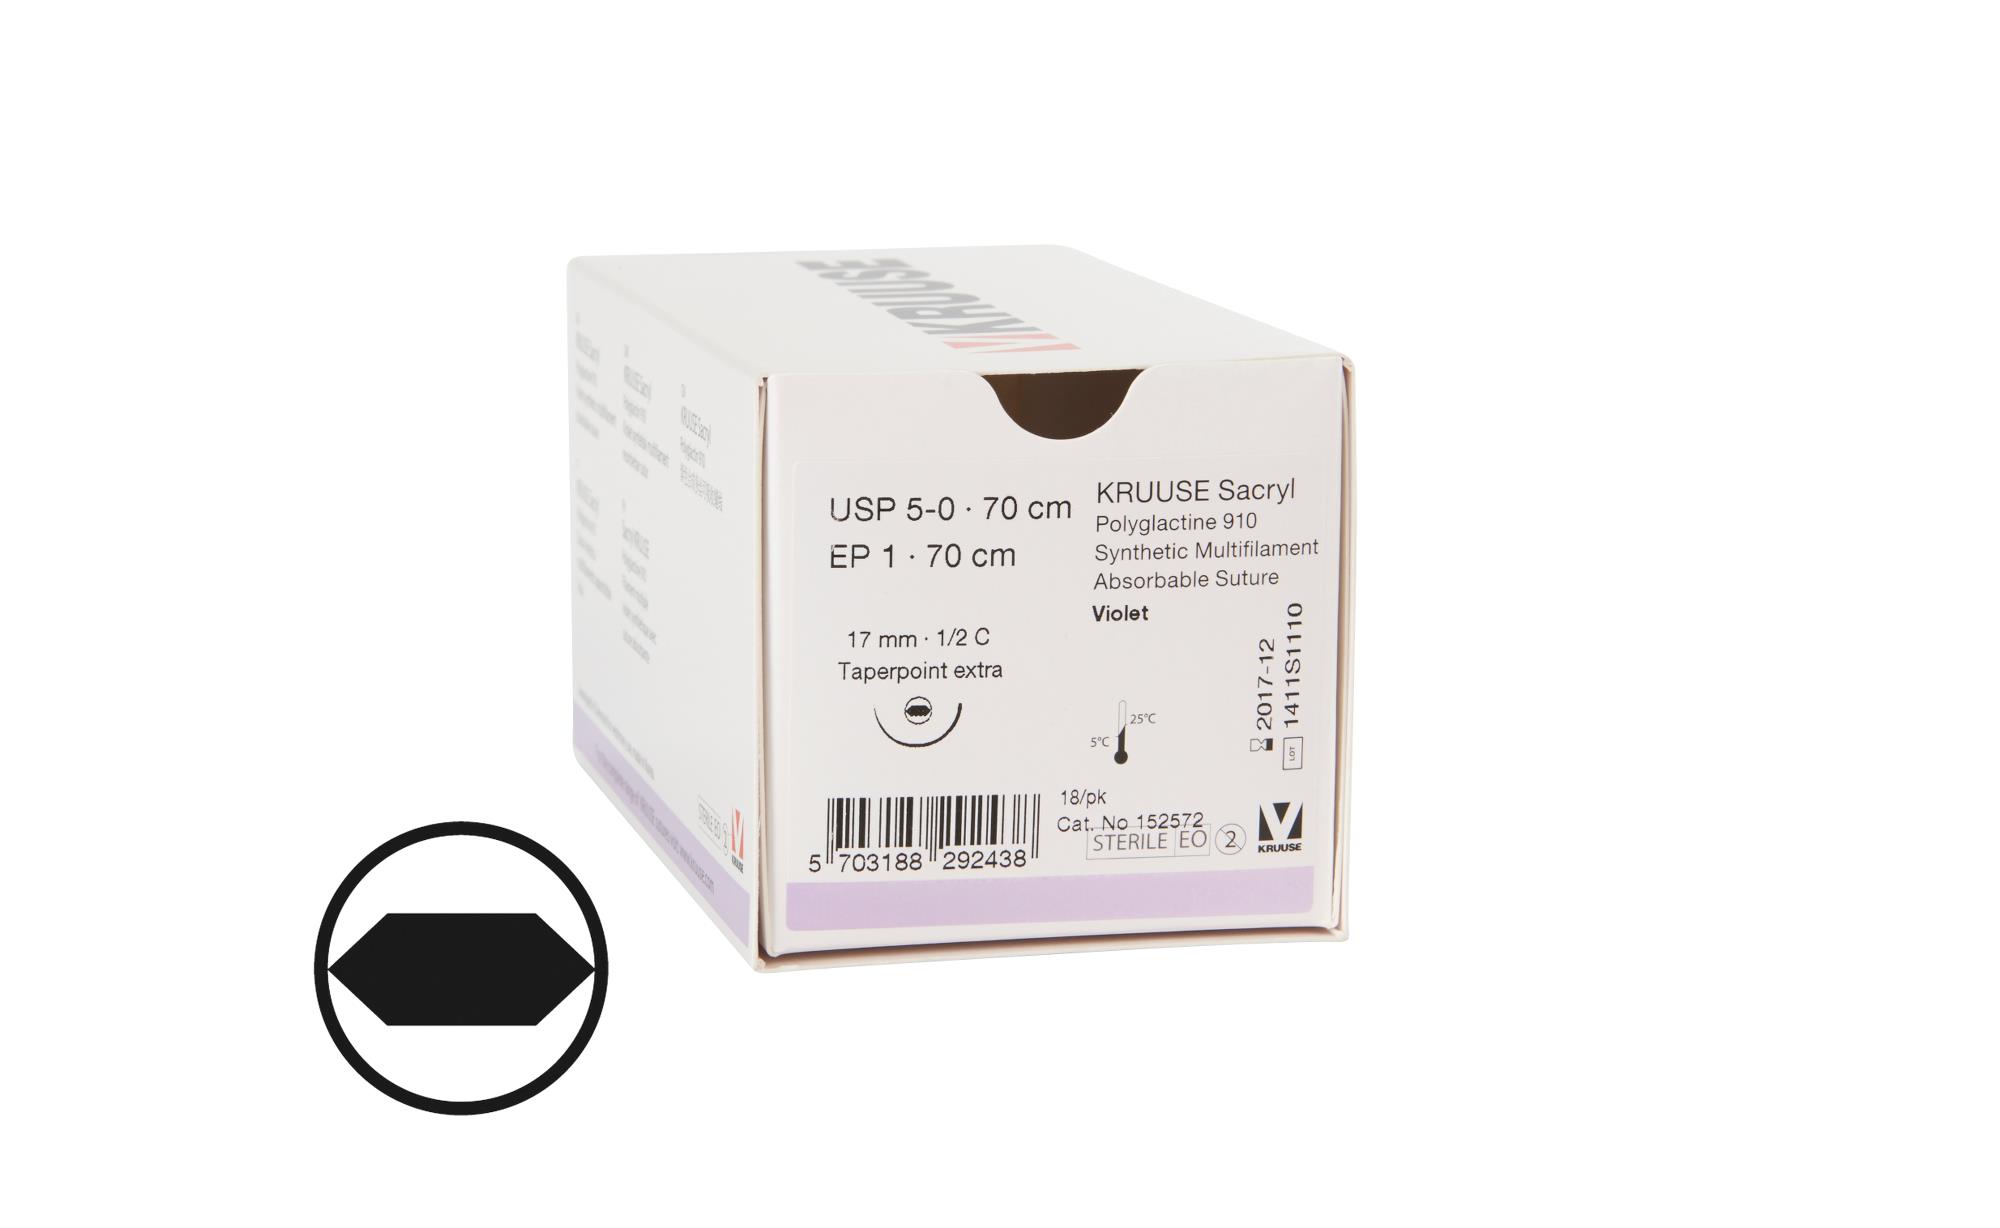 KRUUSE Sacryl Suture, USP 5-0, 70 cm violet, 17 mm needle, ½ C, round bodied taperpoint extra, 18/pk